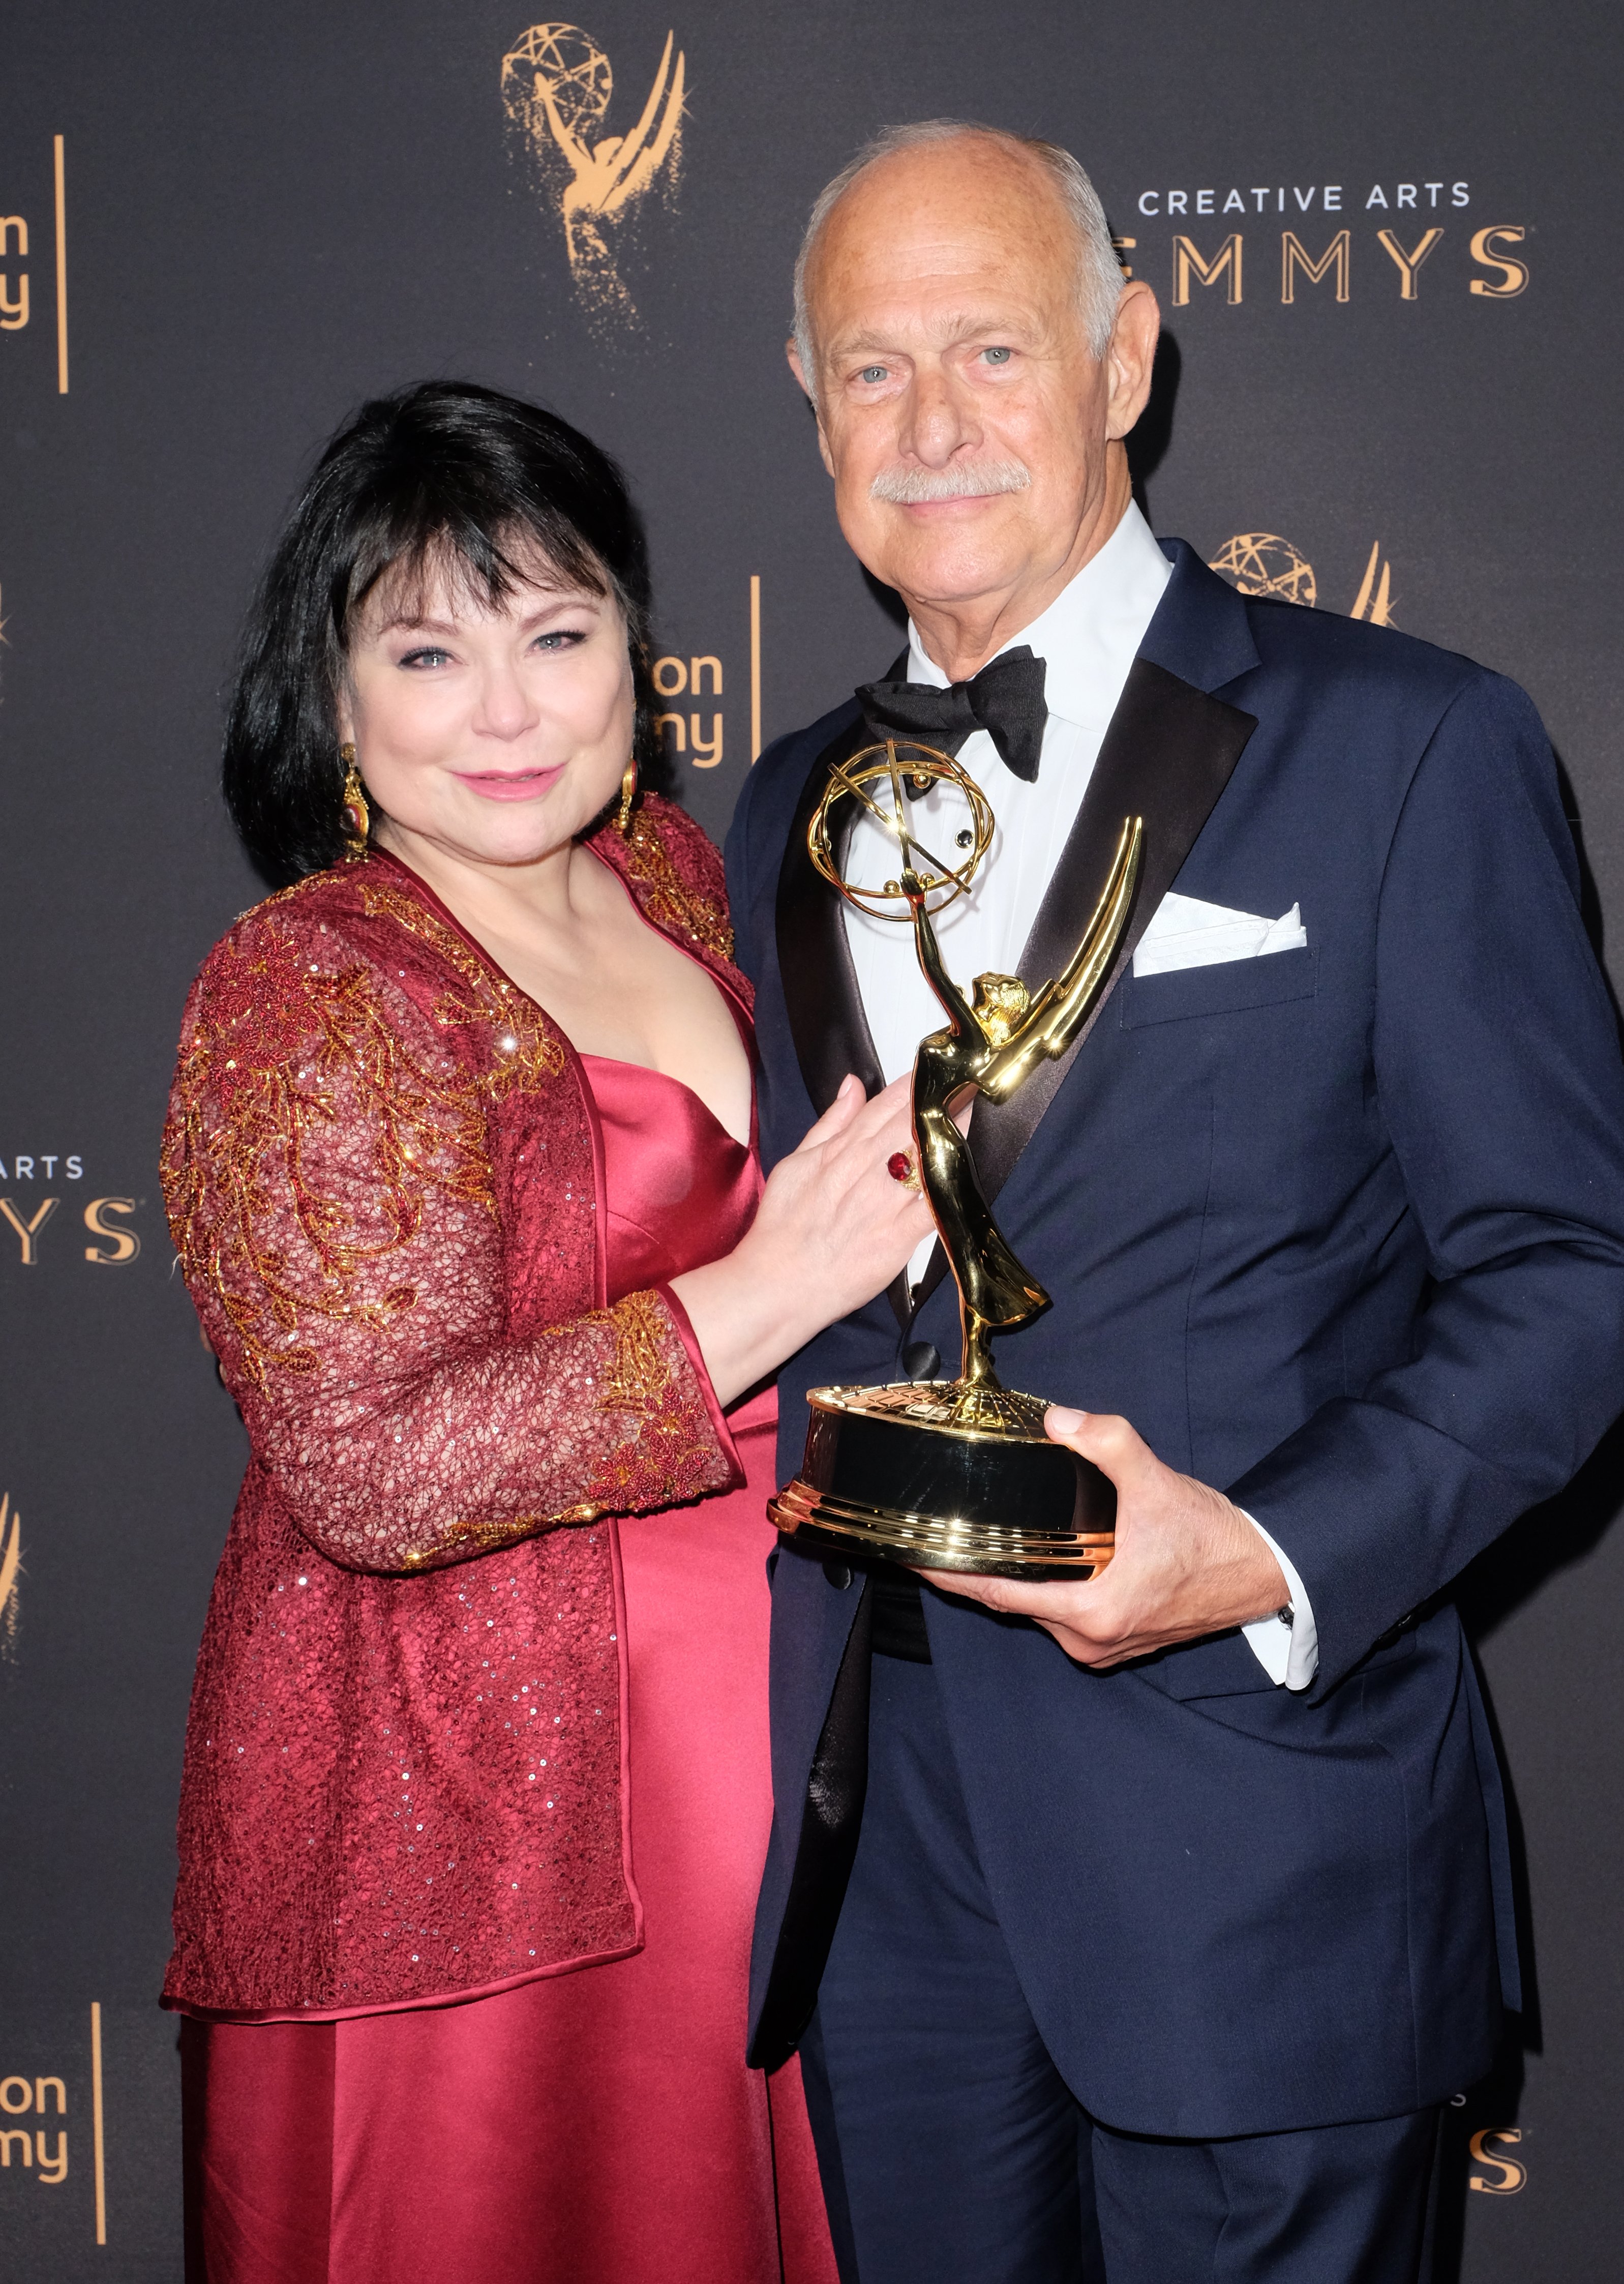 Delta Birke and Gerald McRaney pose in the press room at the 2017 Creative Arts Emmy Awards at Microsoft Theater on September 10, 2017 in Los Angeles, California | Source: Getty Images